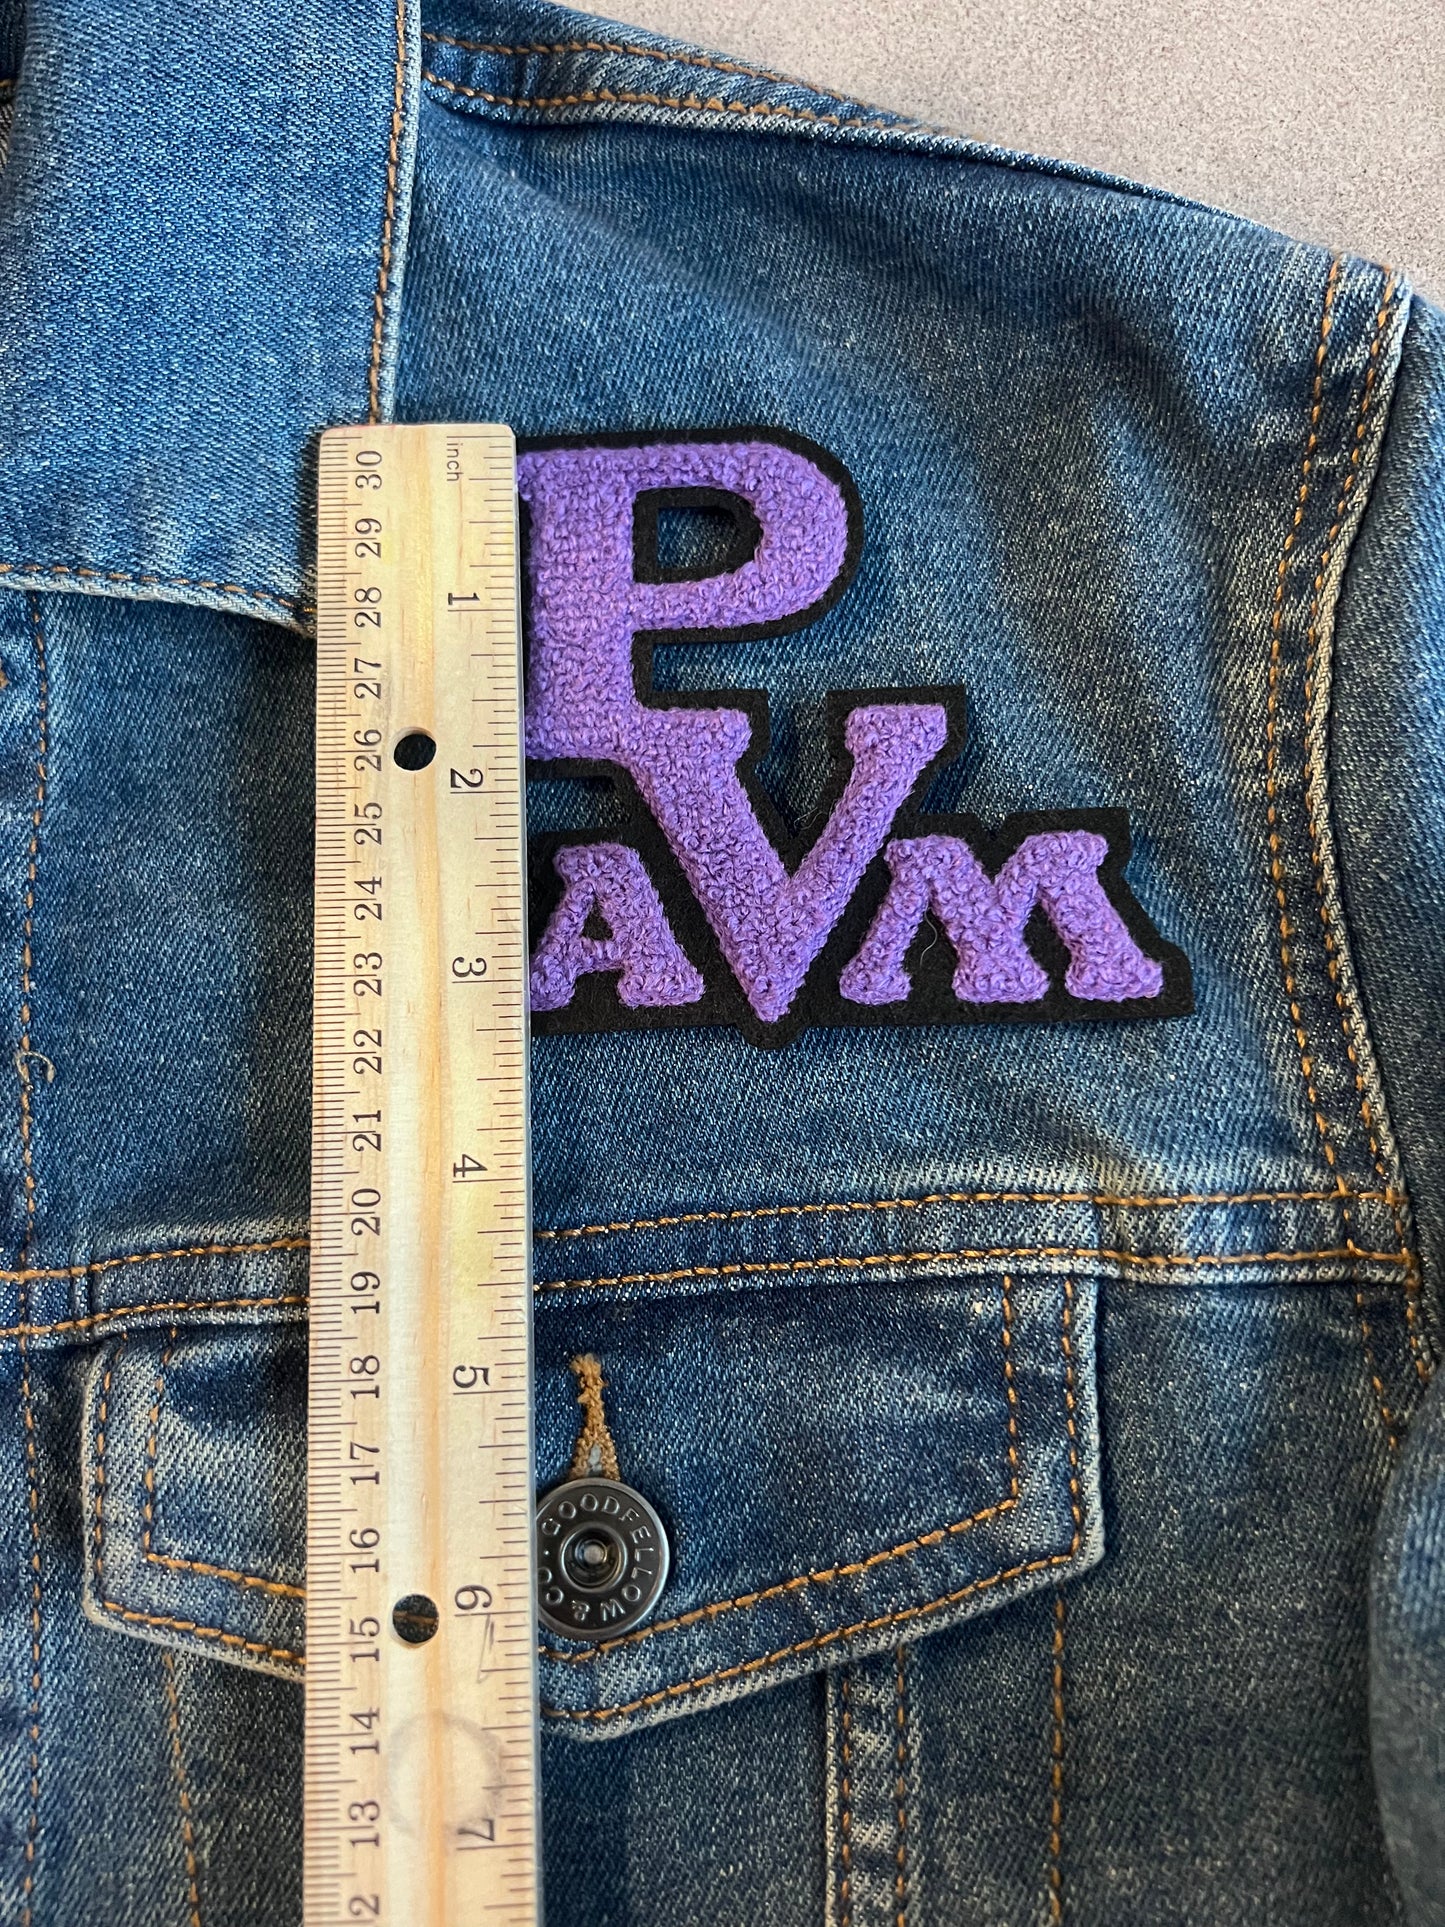 Prarie View A & M University Chenille patch